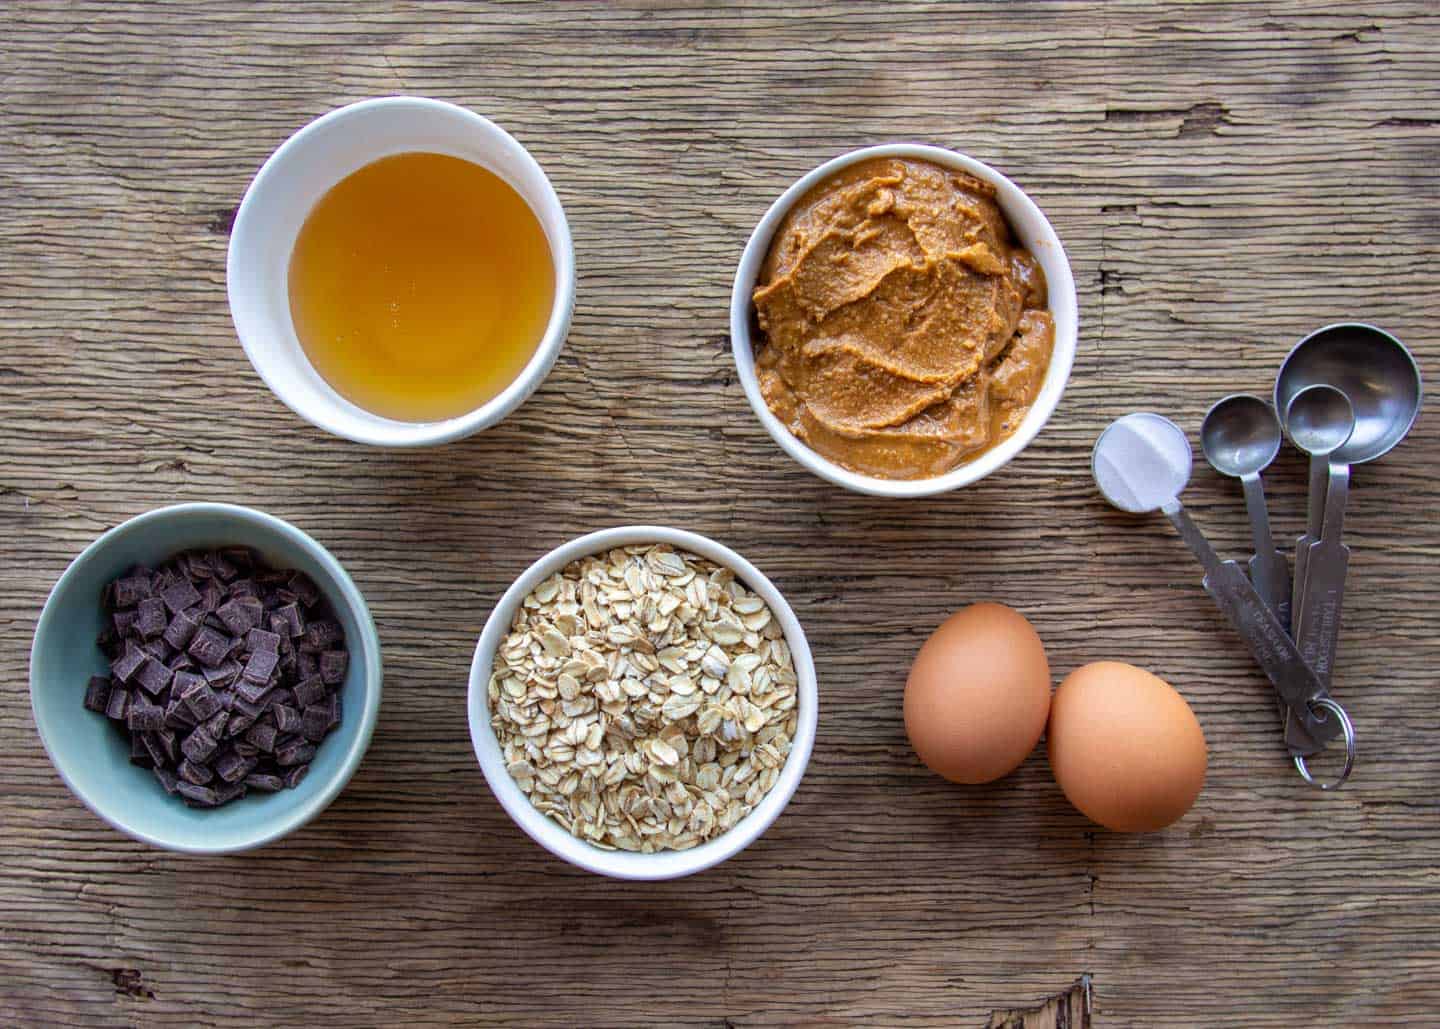 Ingredients for peanut butter oatmeal cookies